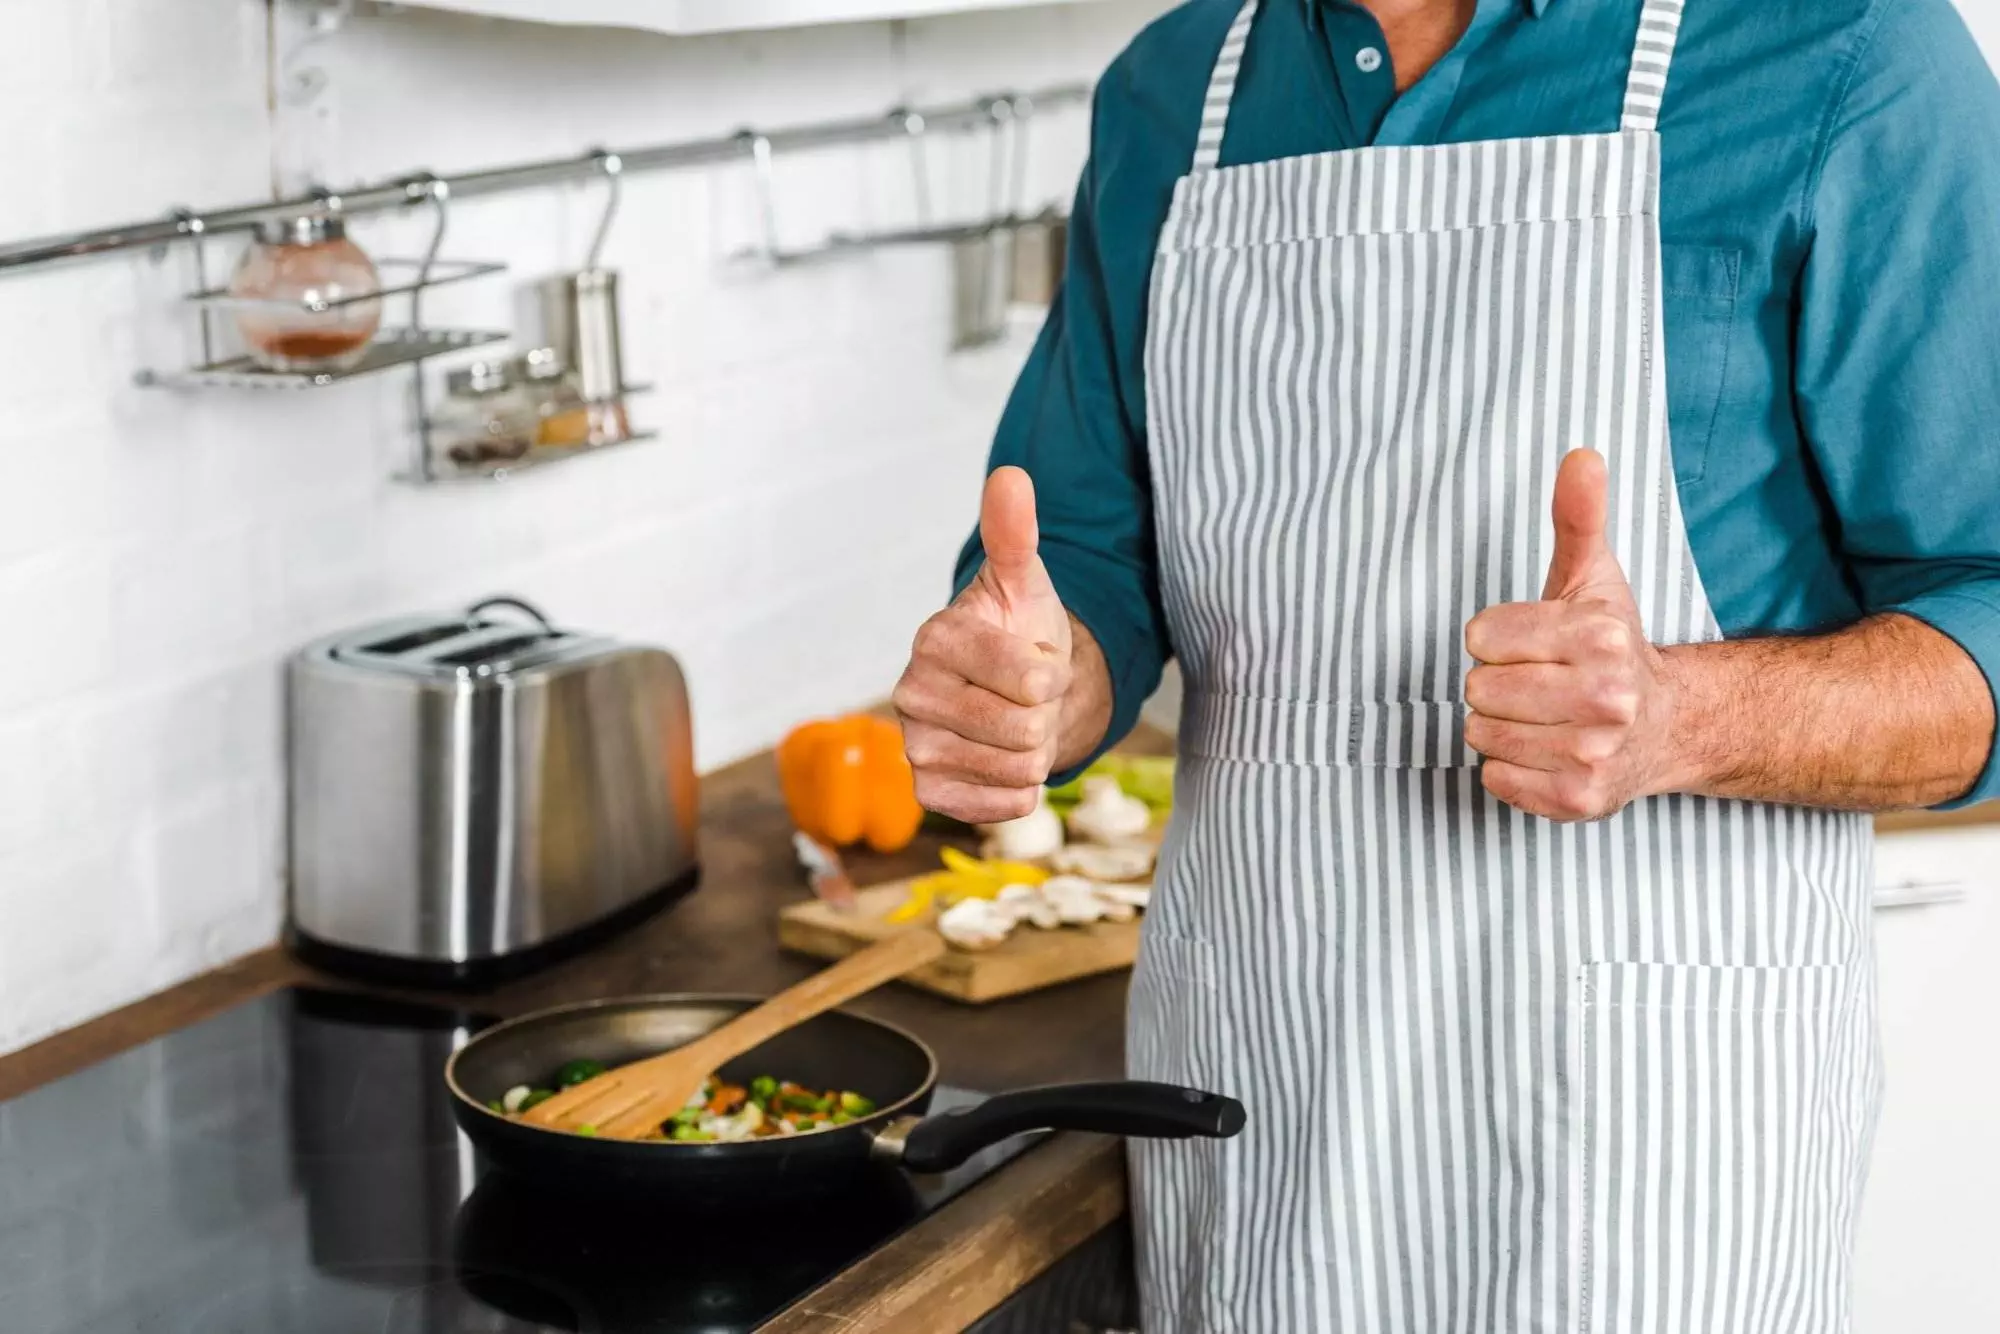 Man frying vegetables showing thumbs up